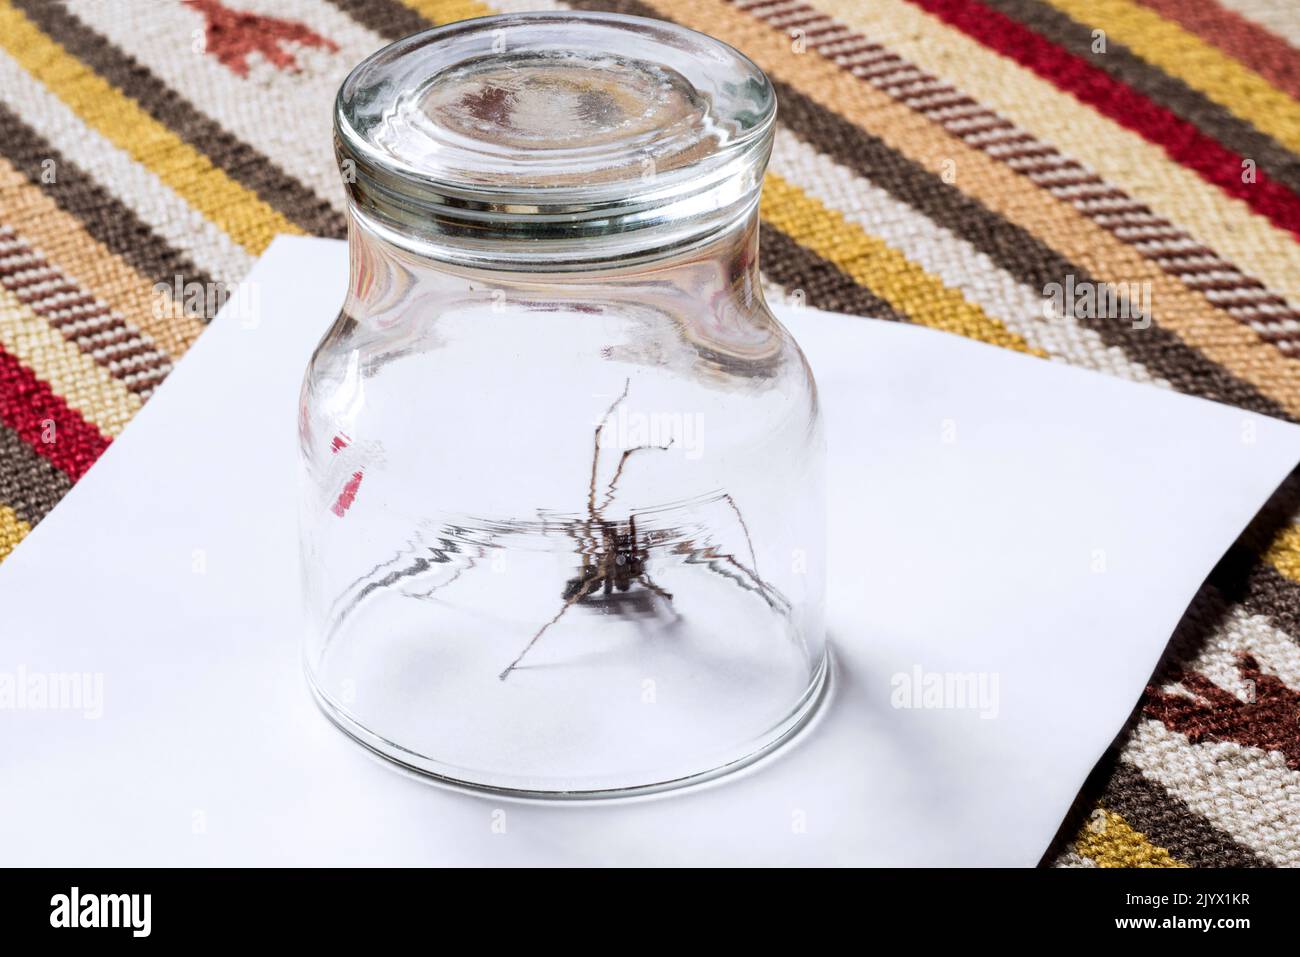 Animal-friendly way to remove giant house spider on carpet in bedroom by trapping in glass and sliding paper underneath before releasing outdoors Stock Photo